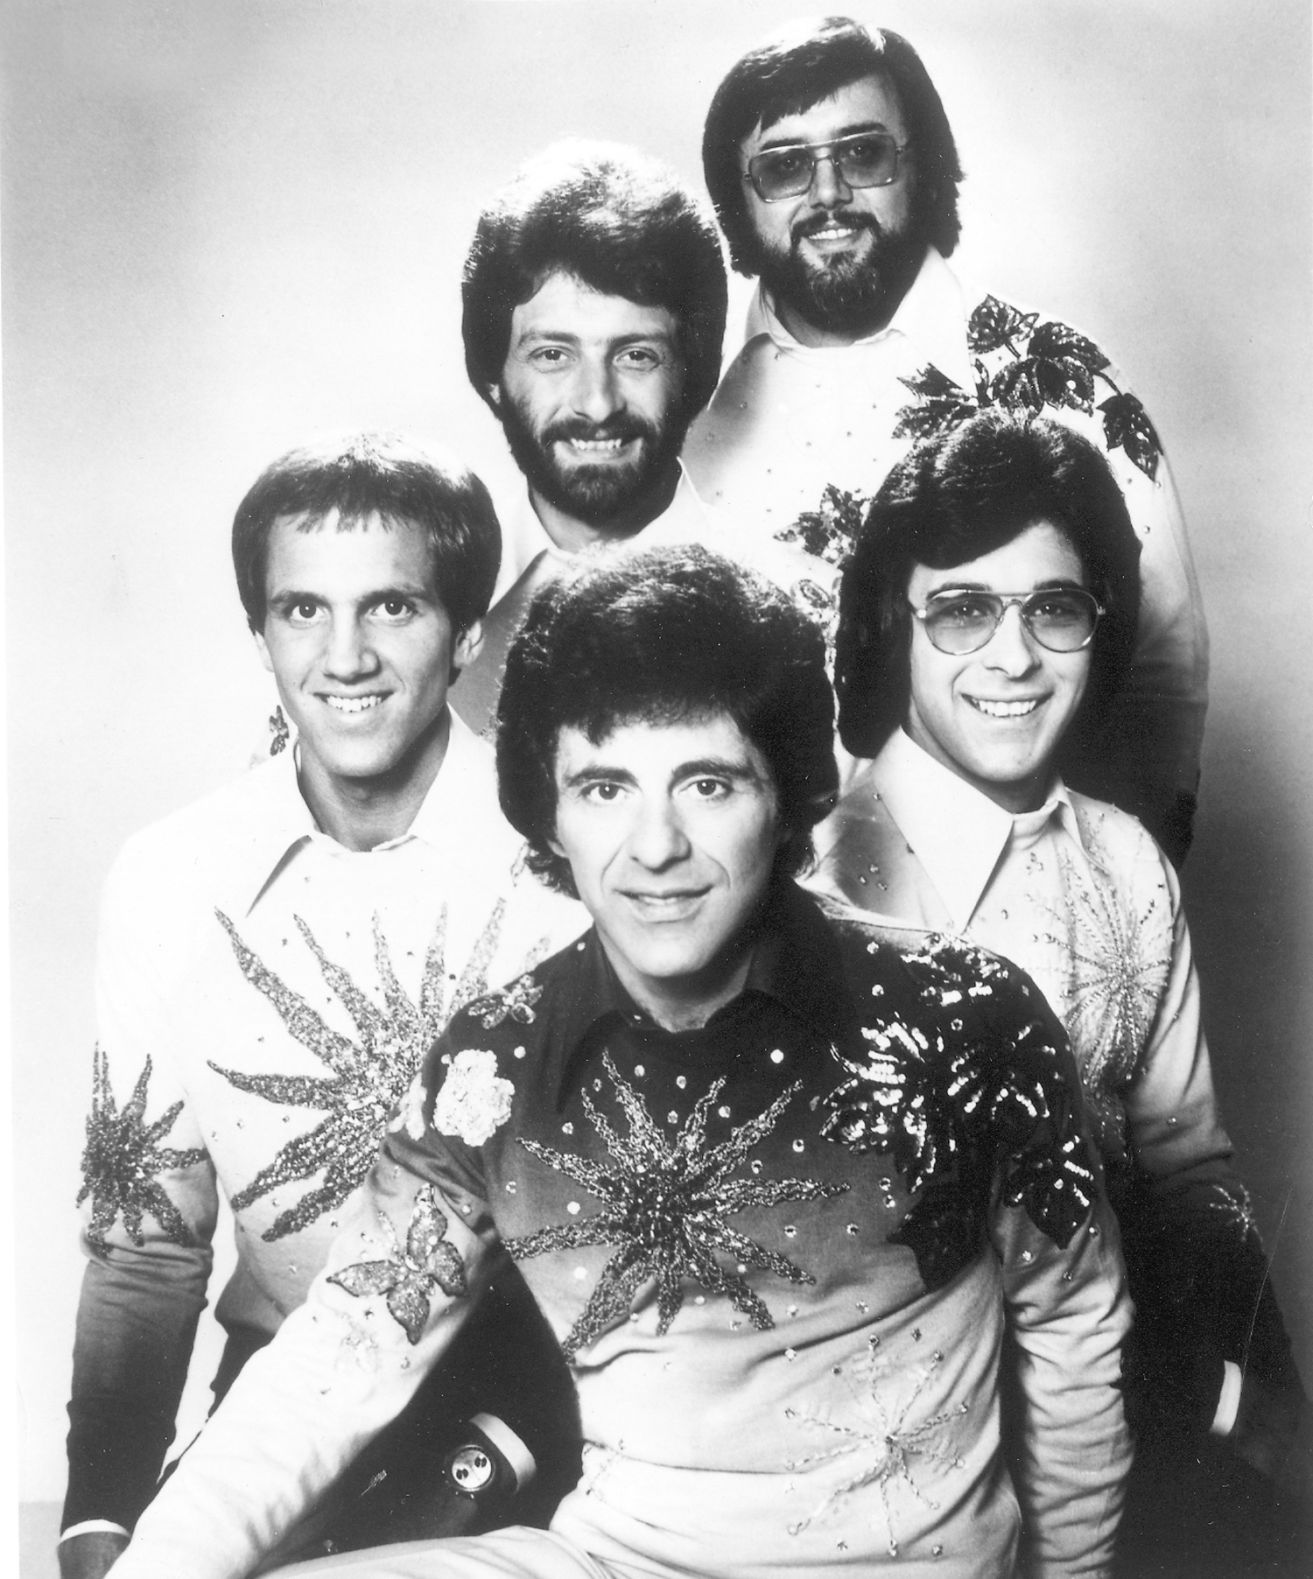 frankie valli and the four seasons